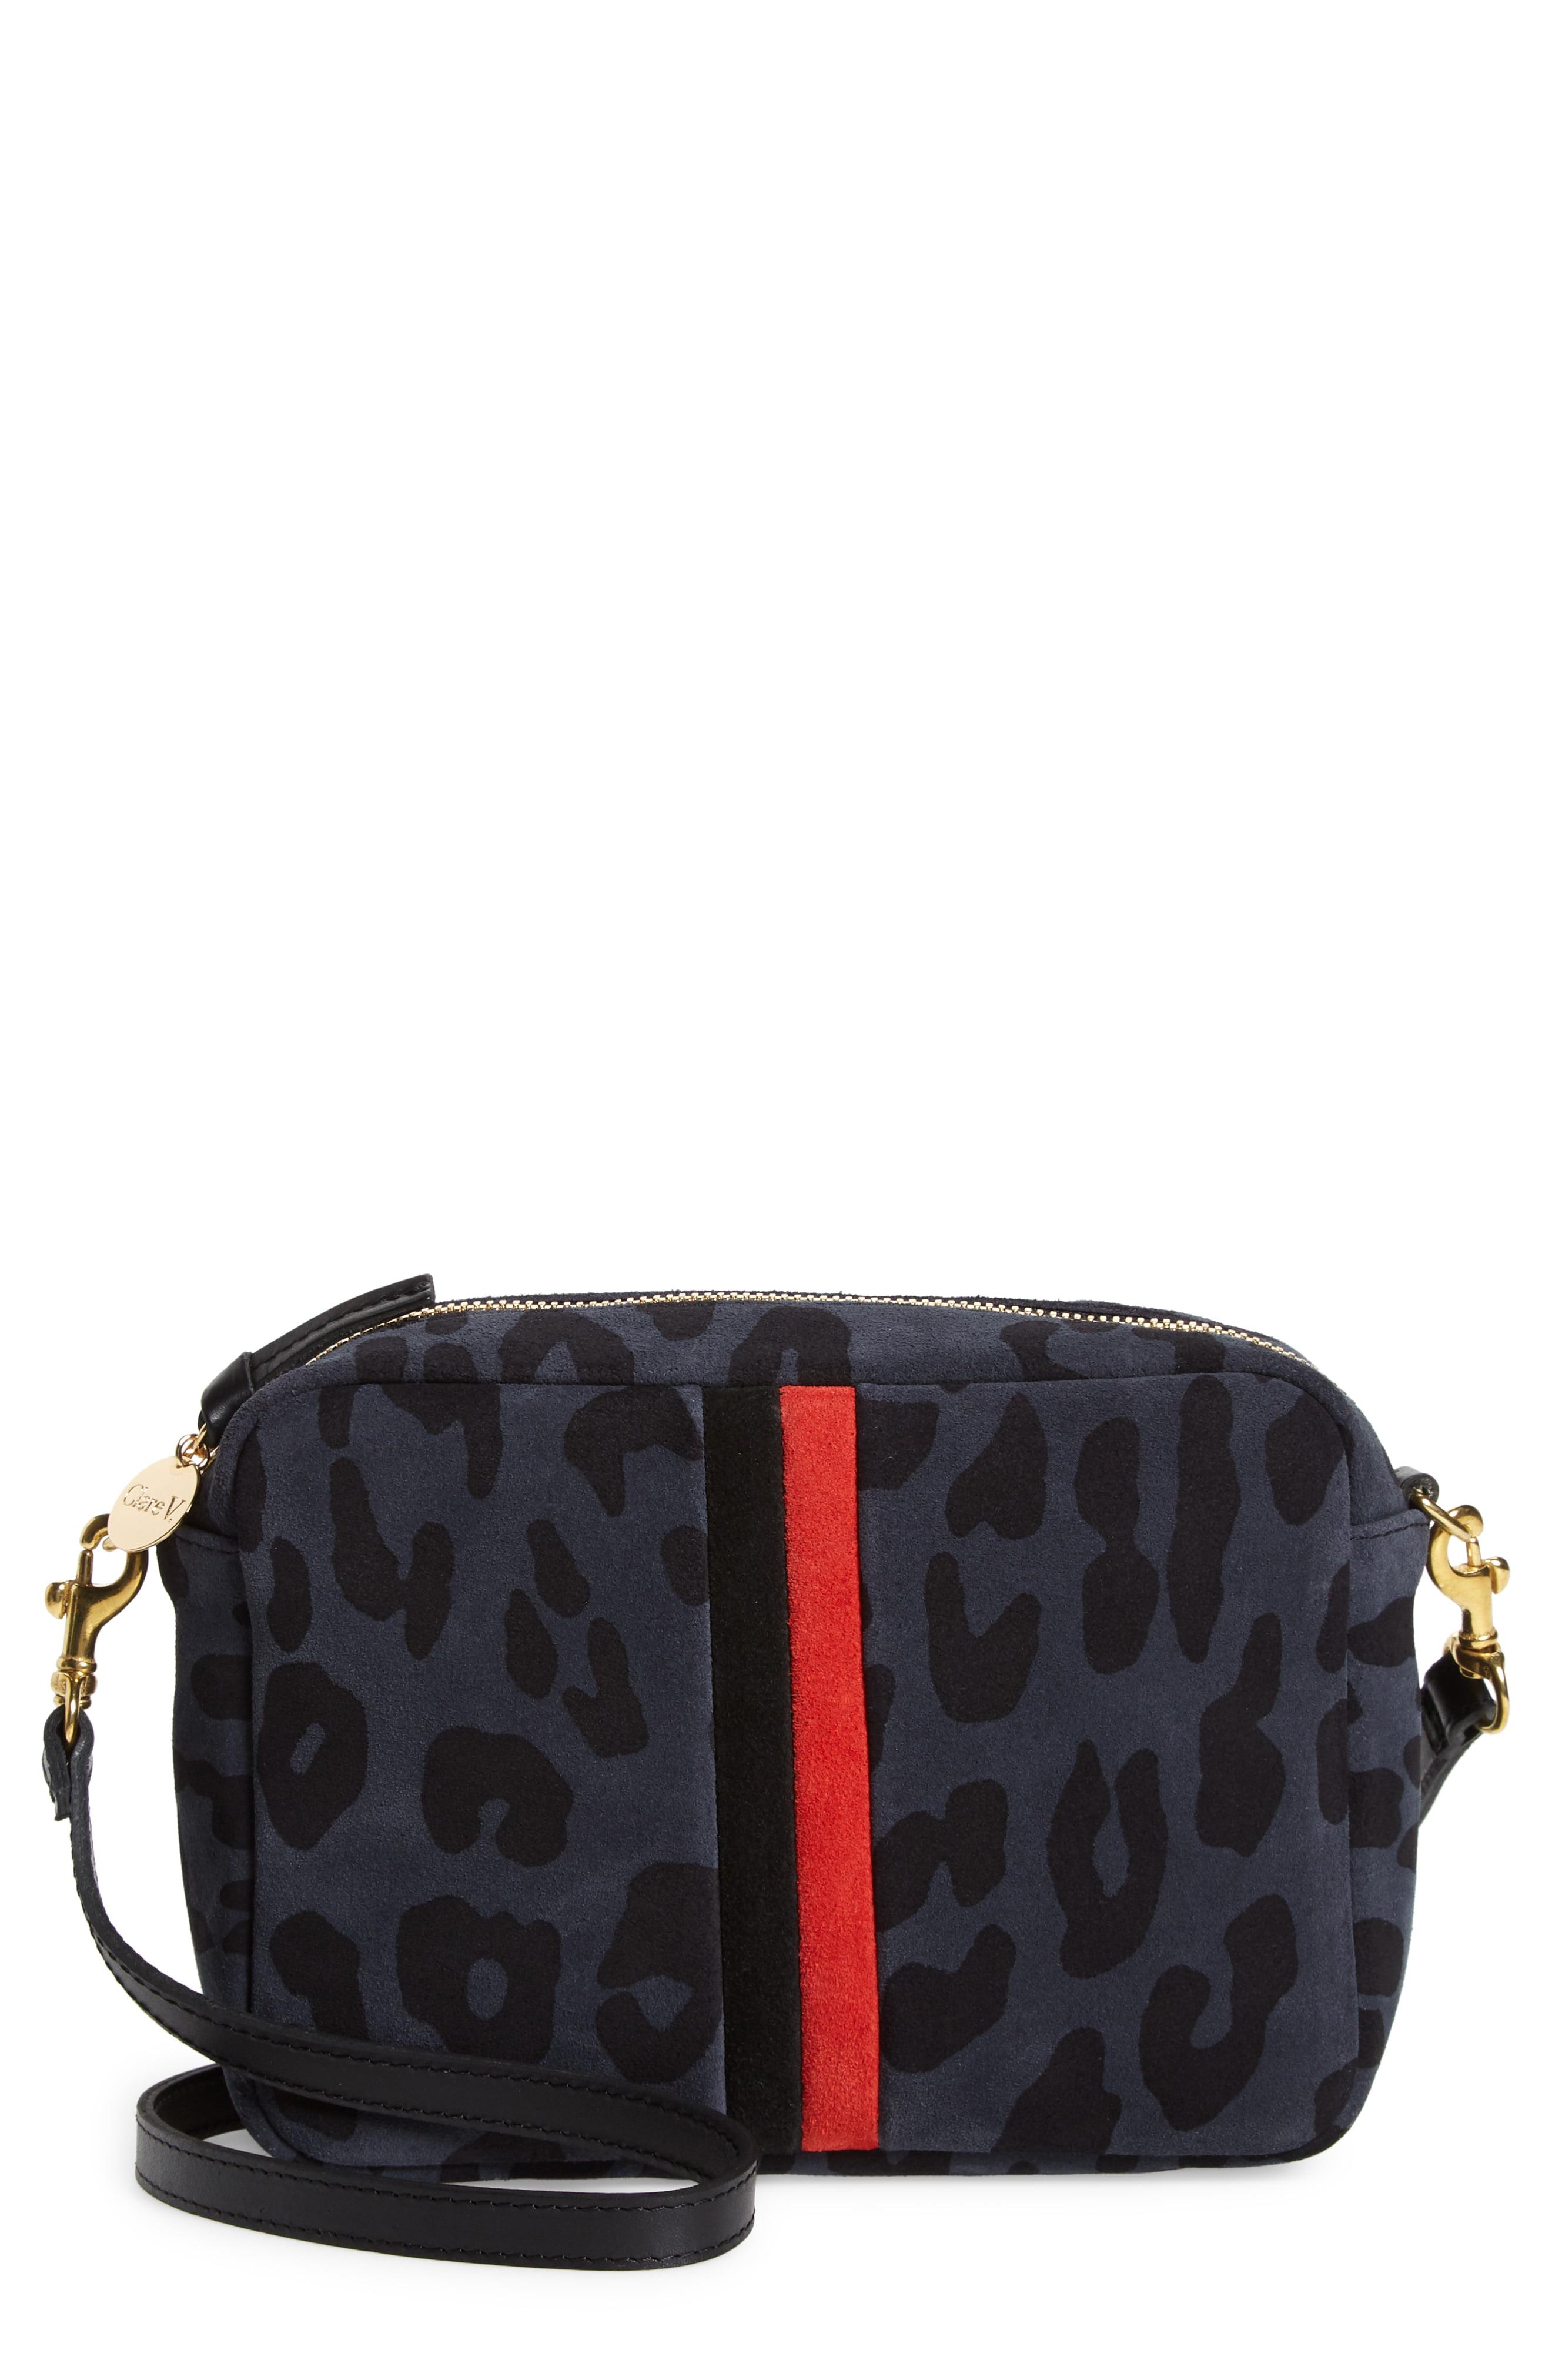 Clare V. Printed Leather Crossbody Bag